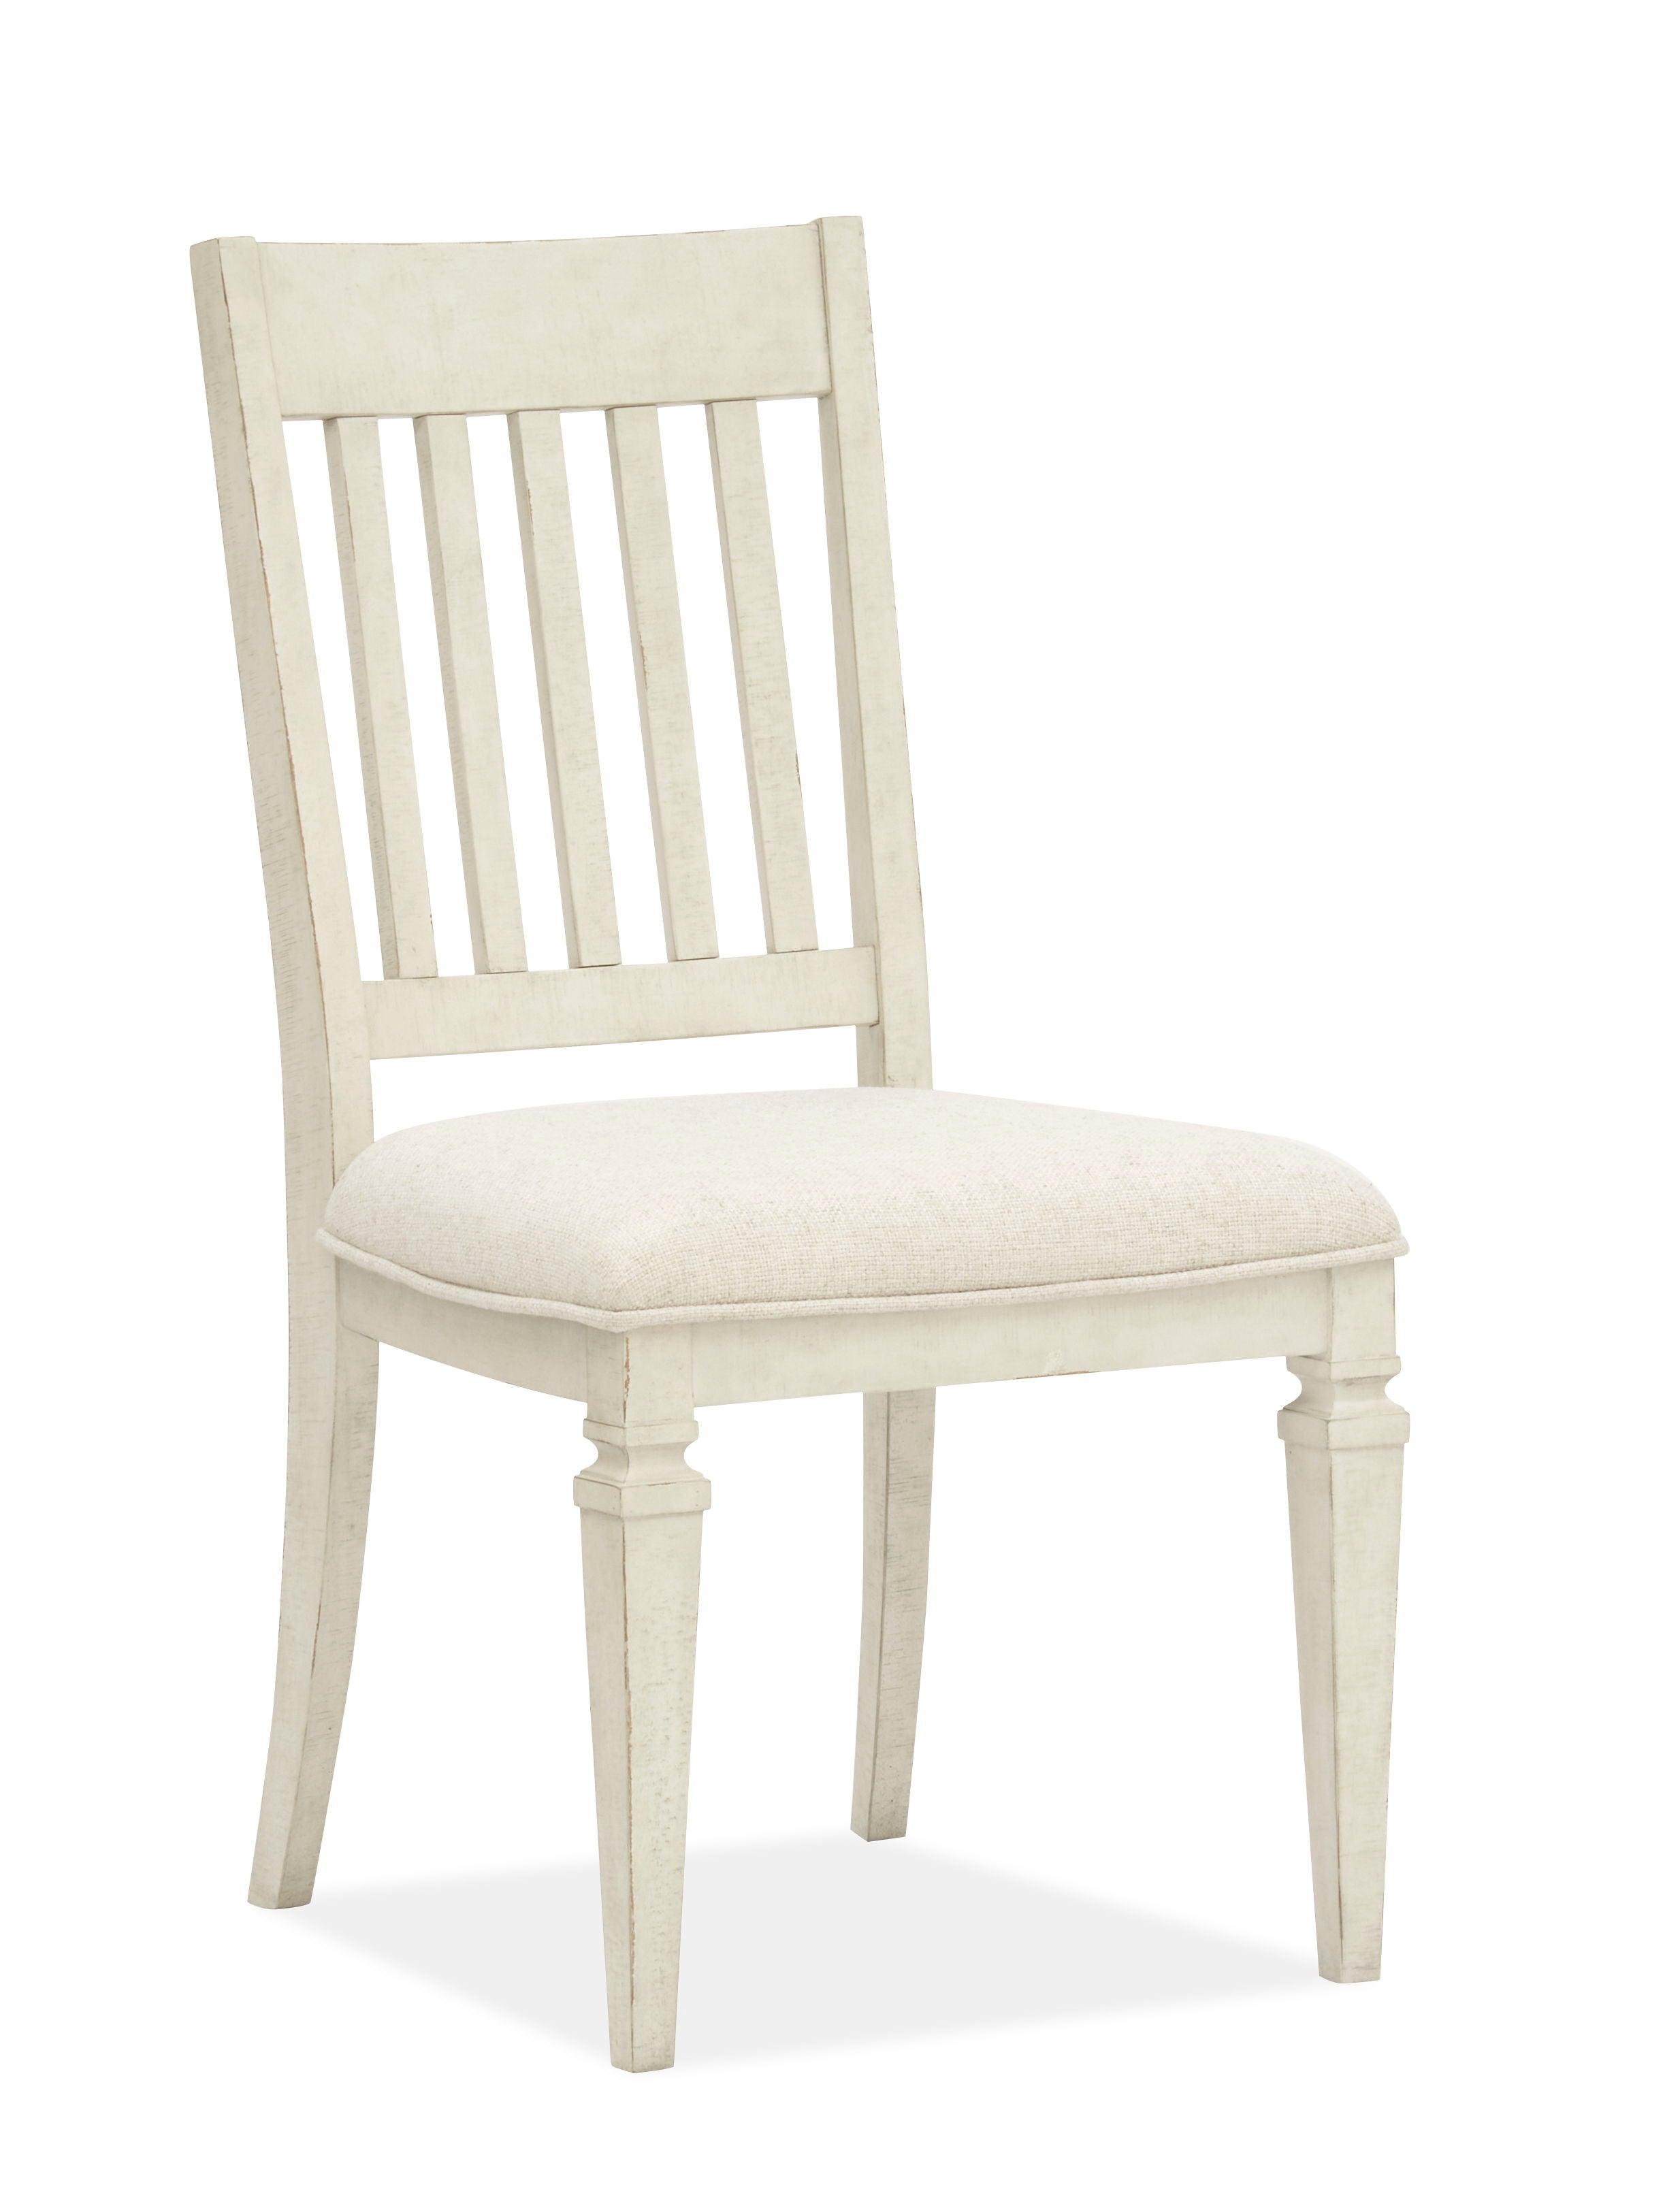 Magnussen Furniture - Newport - Dining Side Chair With Upholstered Seat (Set of 2) - Alabaster - 5th Avenue Furniture